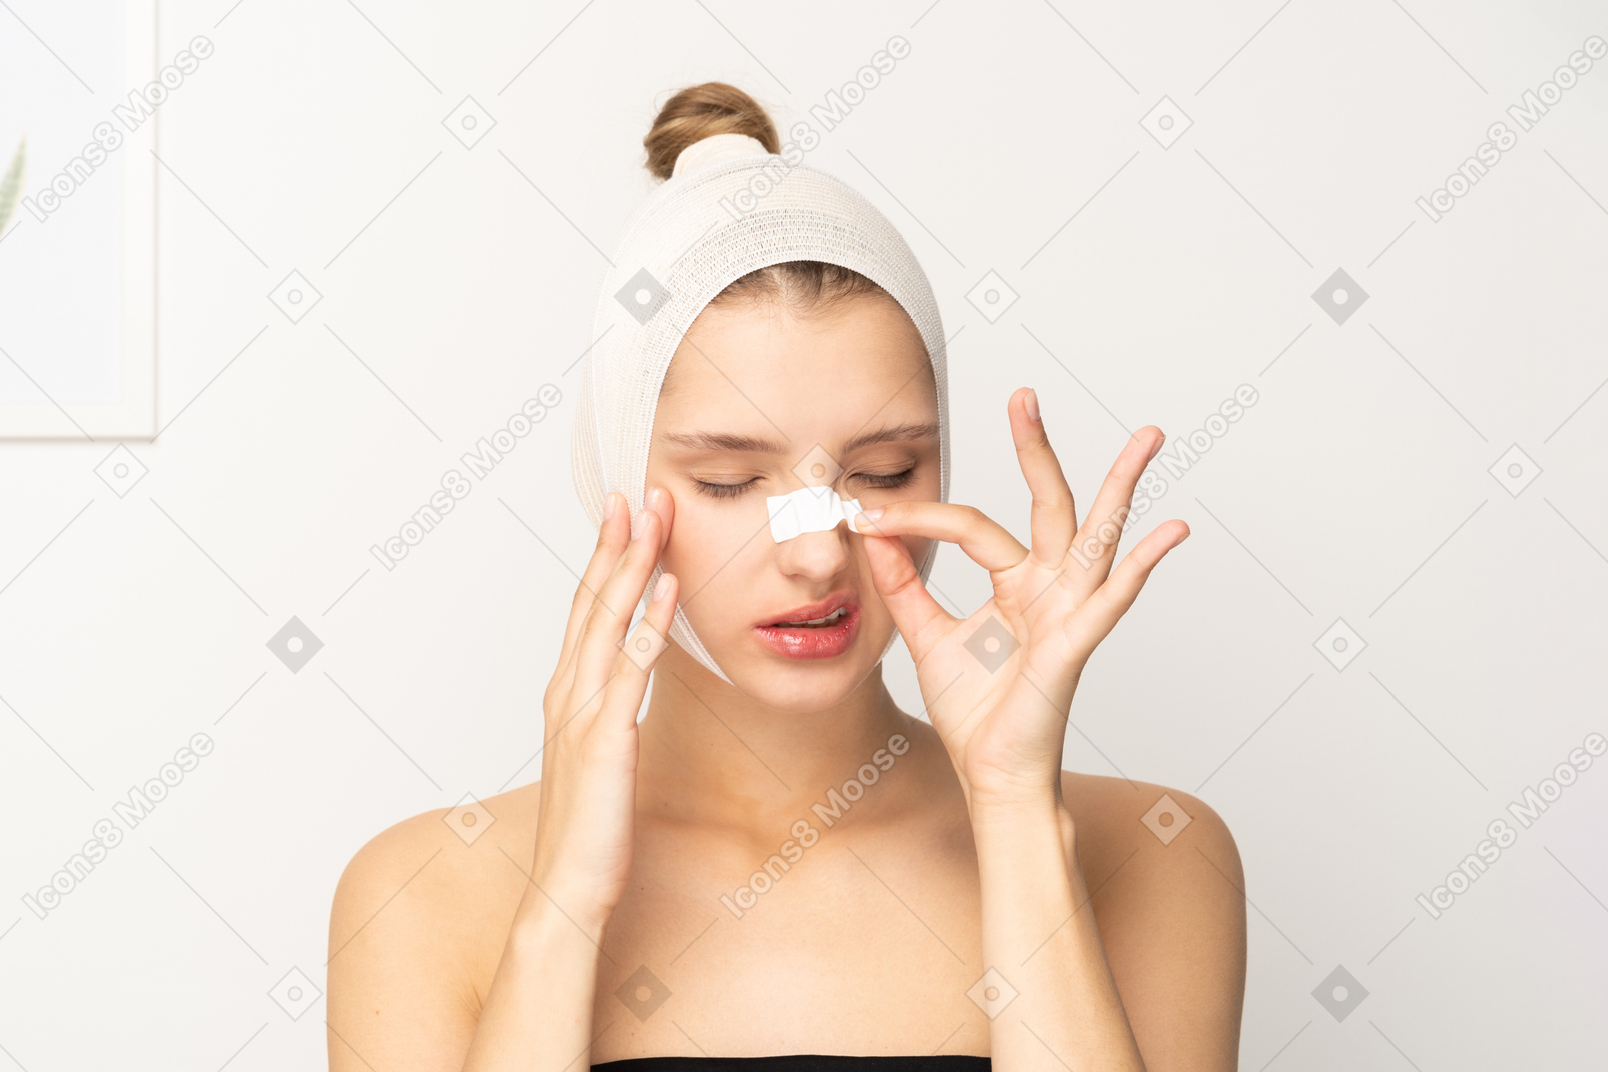 Female patient taking band aid off her nose